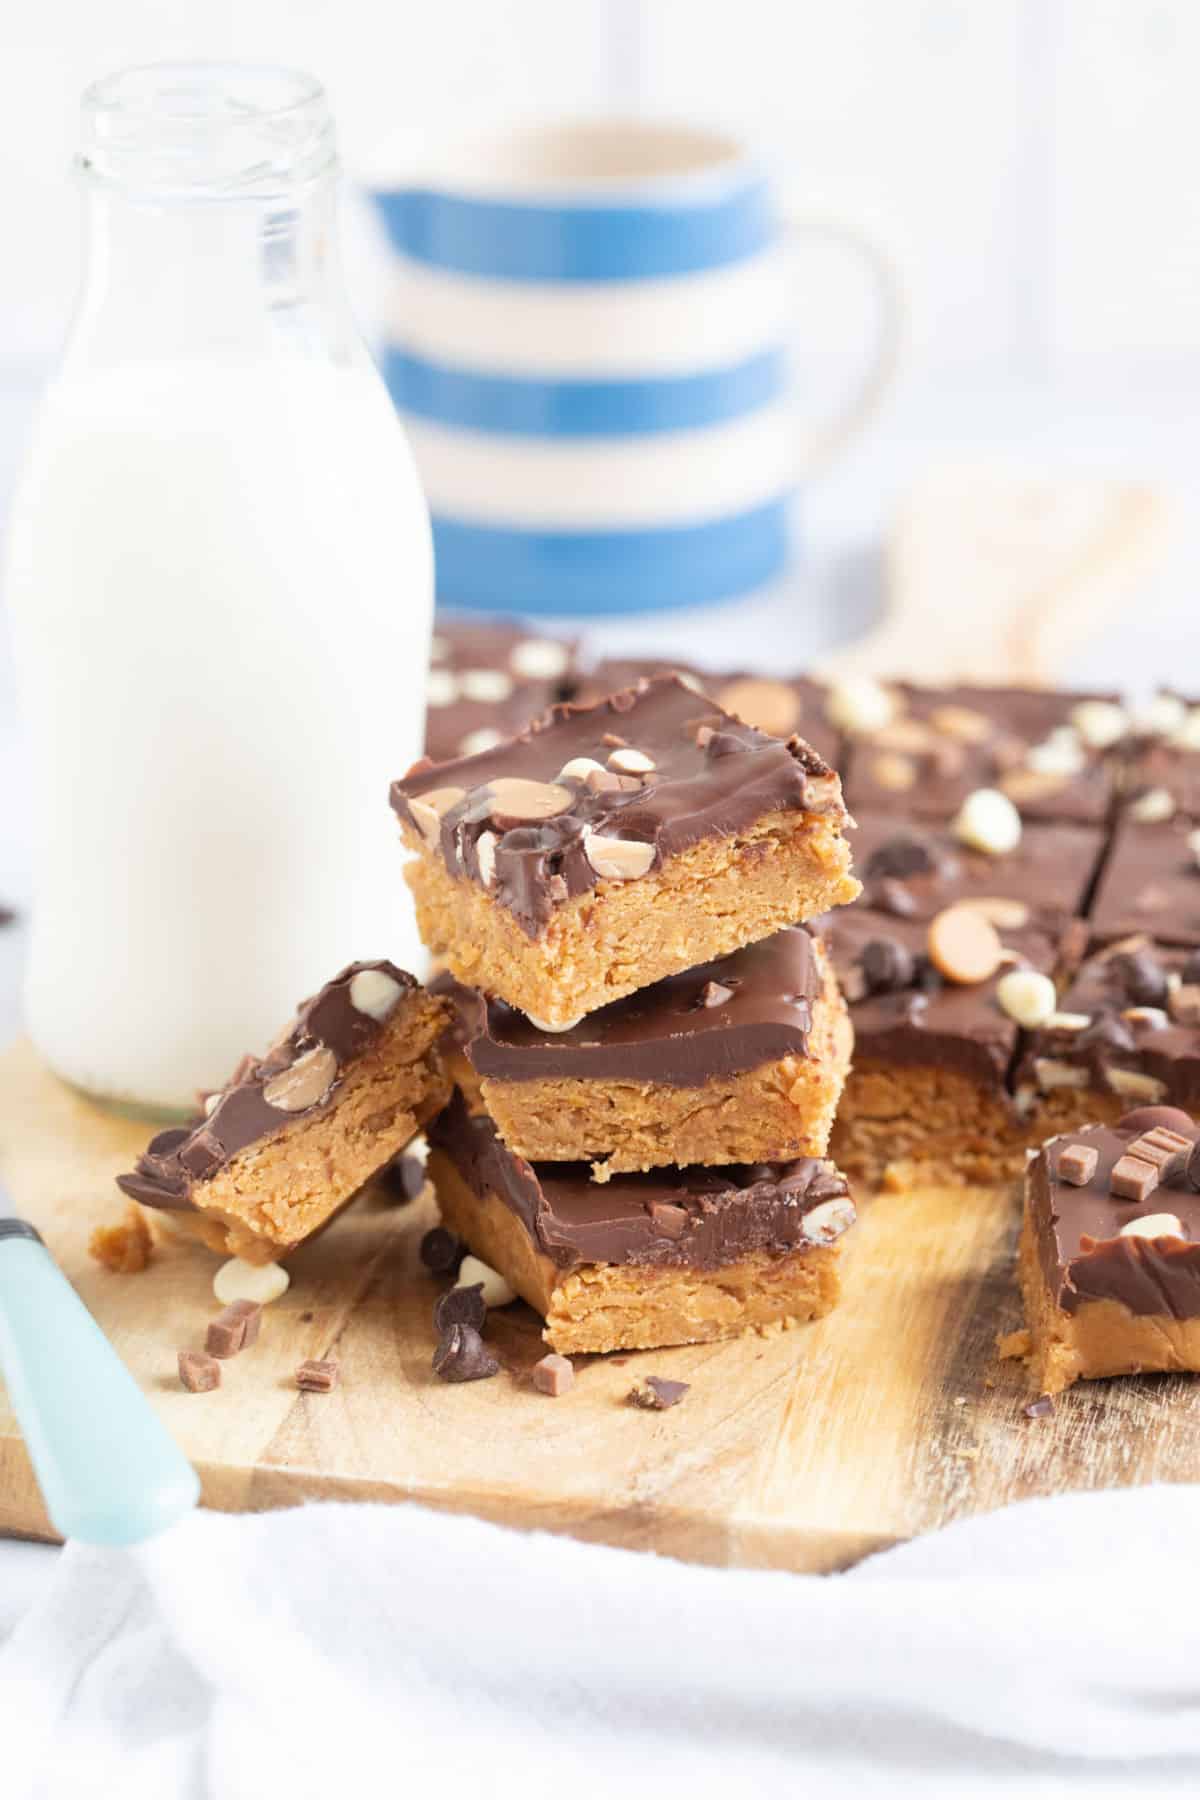 A stack of no bake chocolate peanut butter bars on a wooden board.